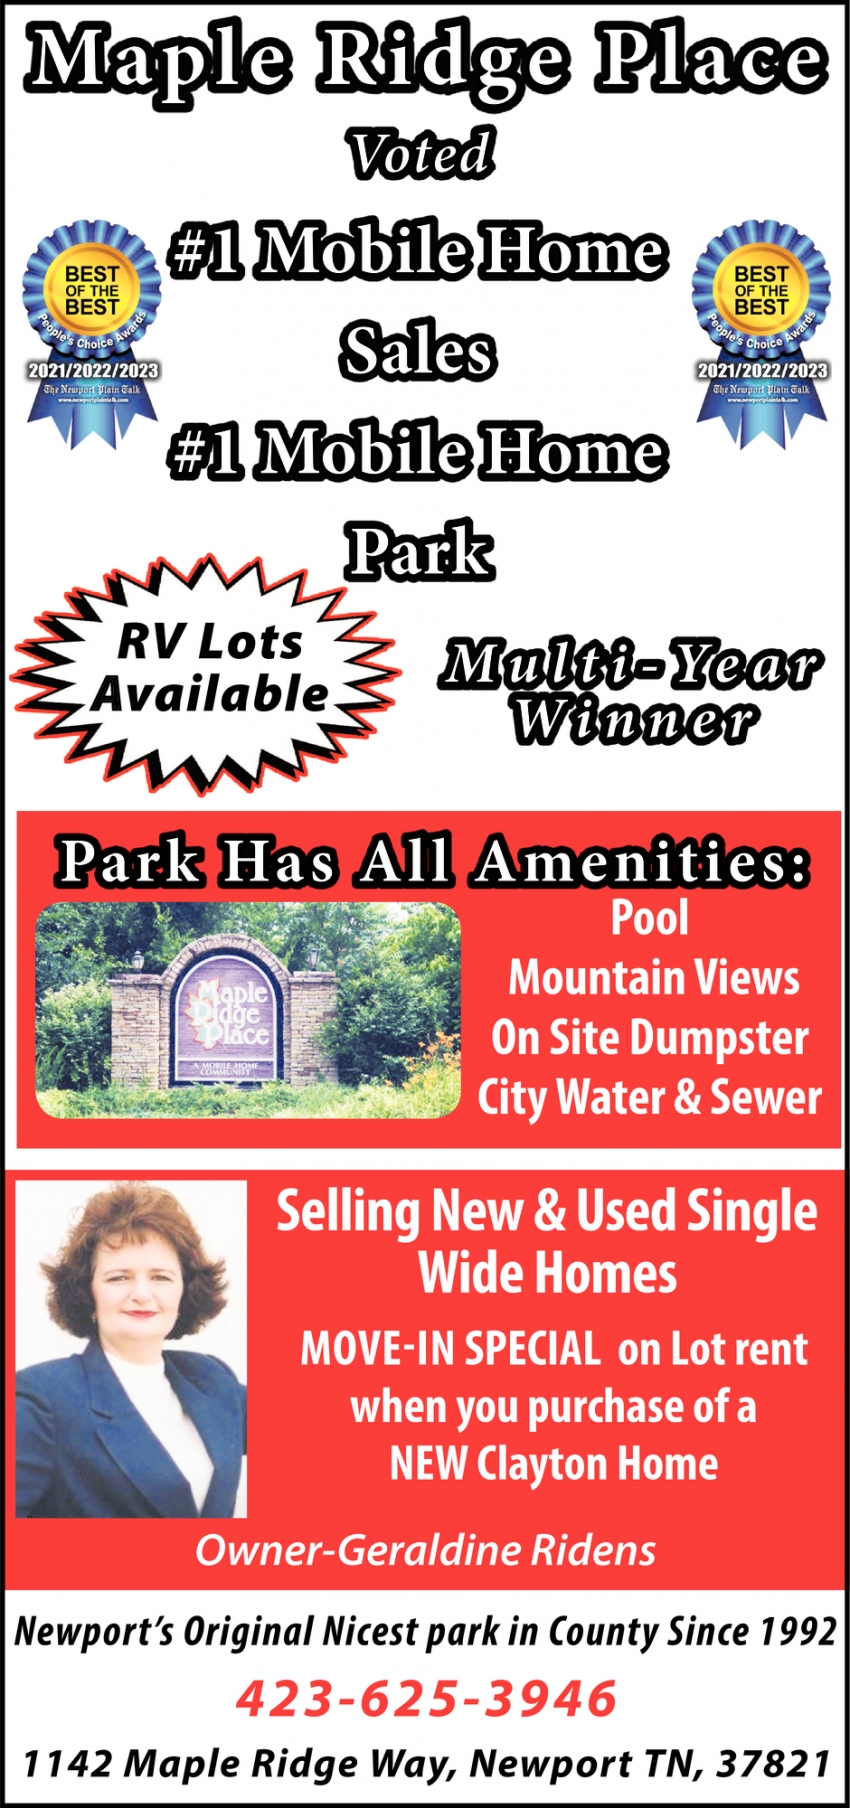 Voted #1 Mobile Home Park #1 Mobile Home Sales